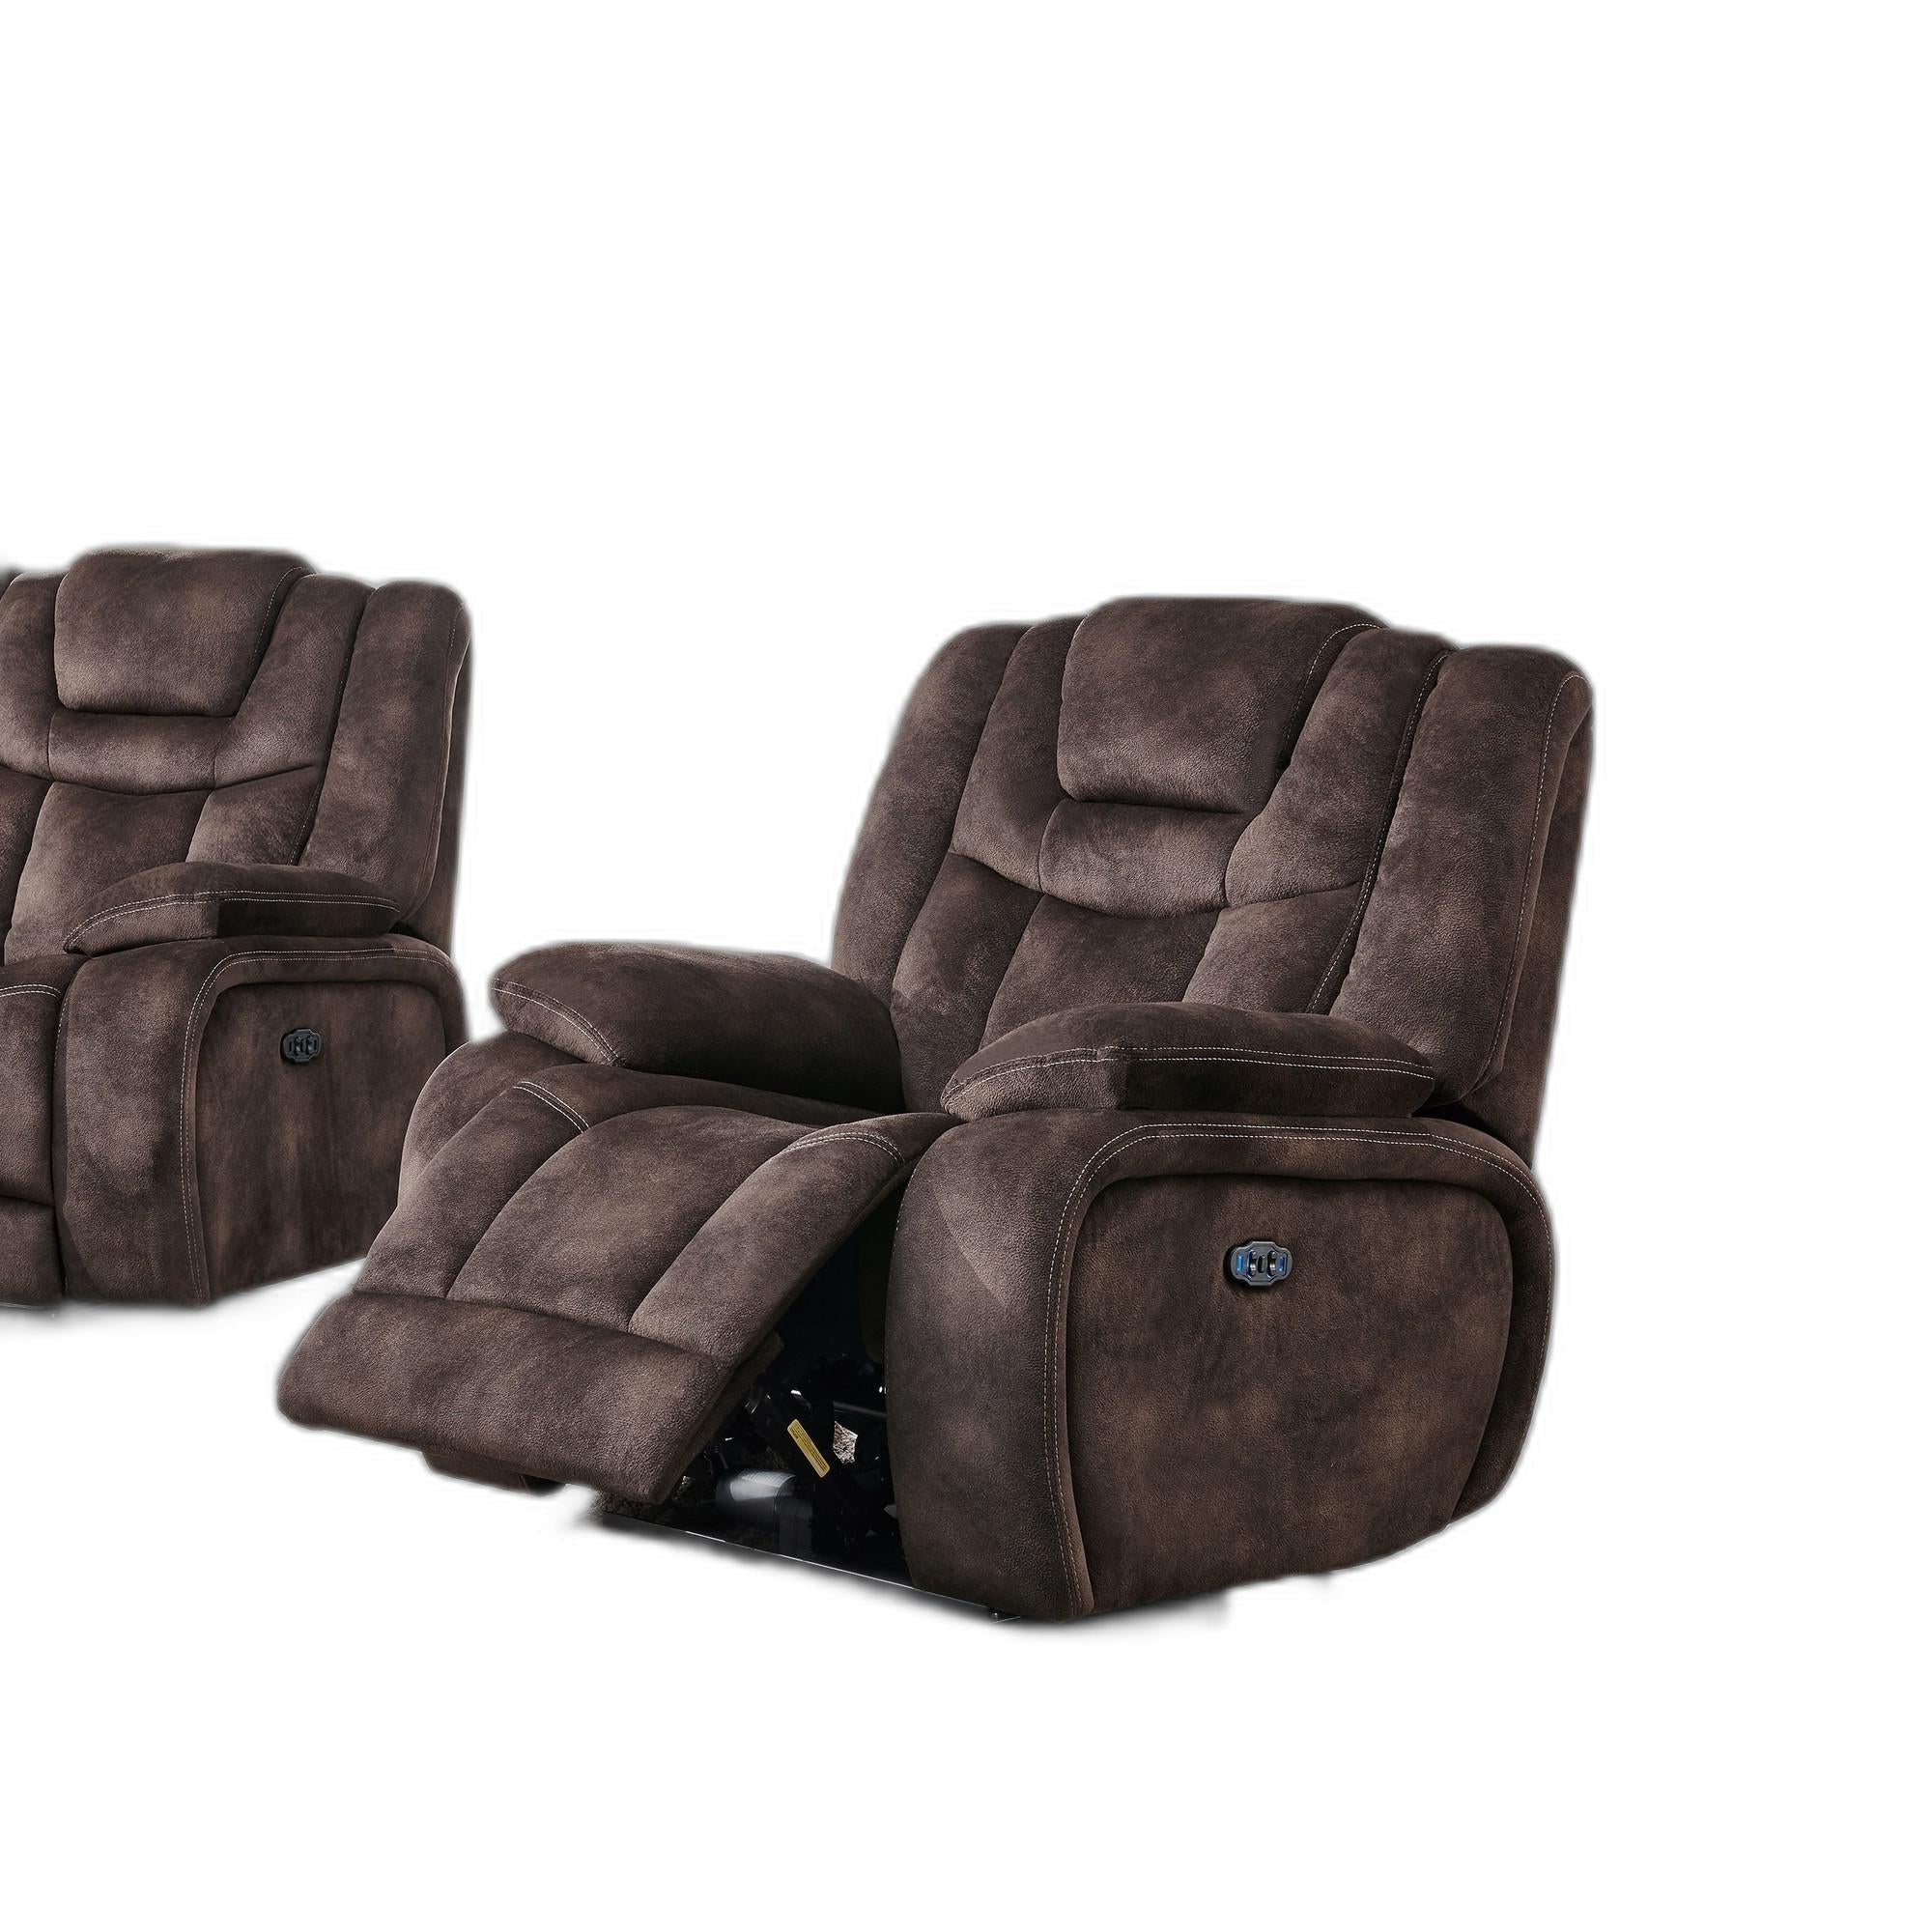 Chocolate Power Glider Recliner with Adjustable Power Headrest and USB Port